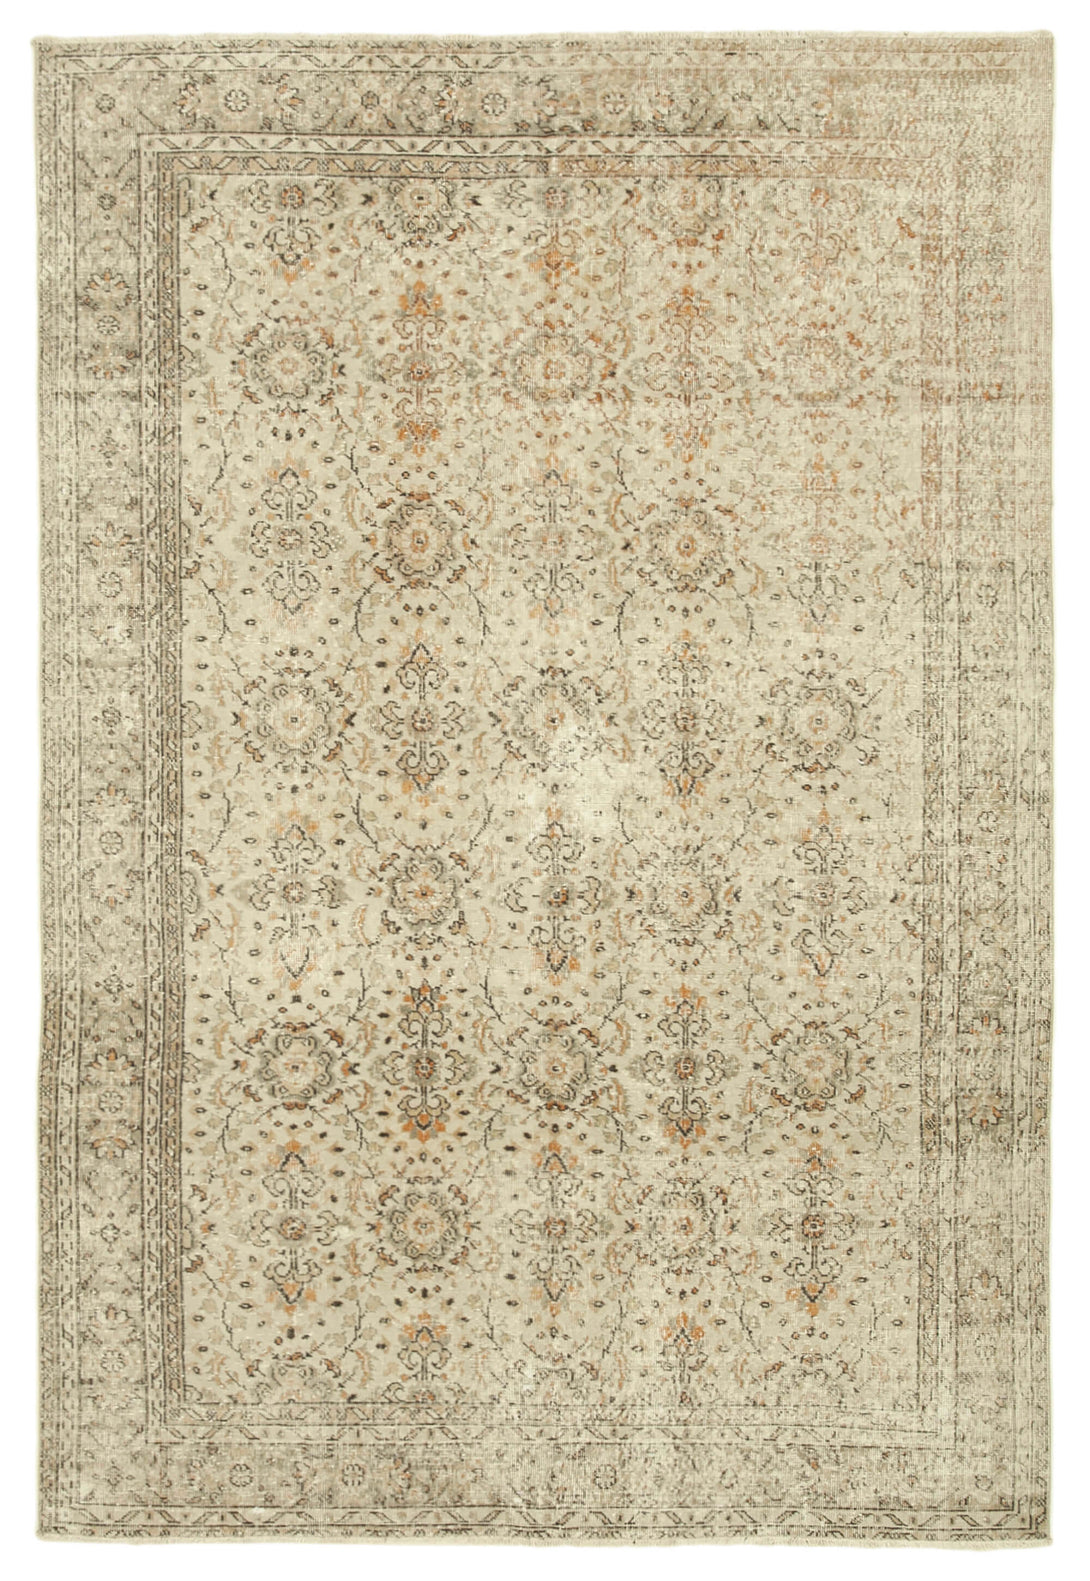 Handmade White Wash Area Rug > Design# OL-AC-38830 > Size: 6'-10" x 10'-4", Carpet Culture Rugs, Handmade Rugs, NYC Rugs, New Rugs, Shop Rugs, Rug Store, Outlet Rugs, SoHo Rugs, Rugs in USA